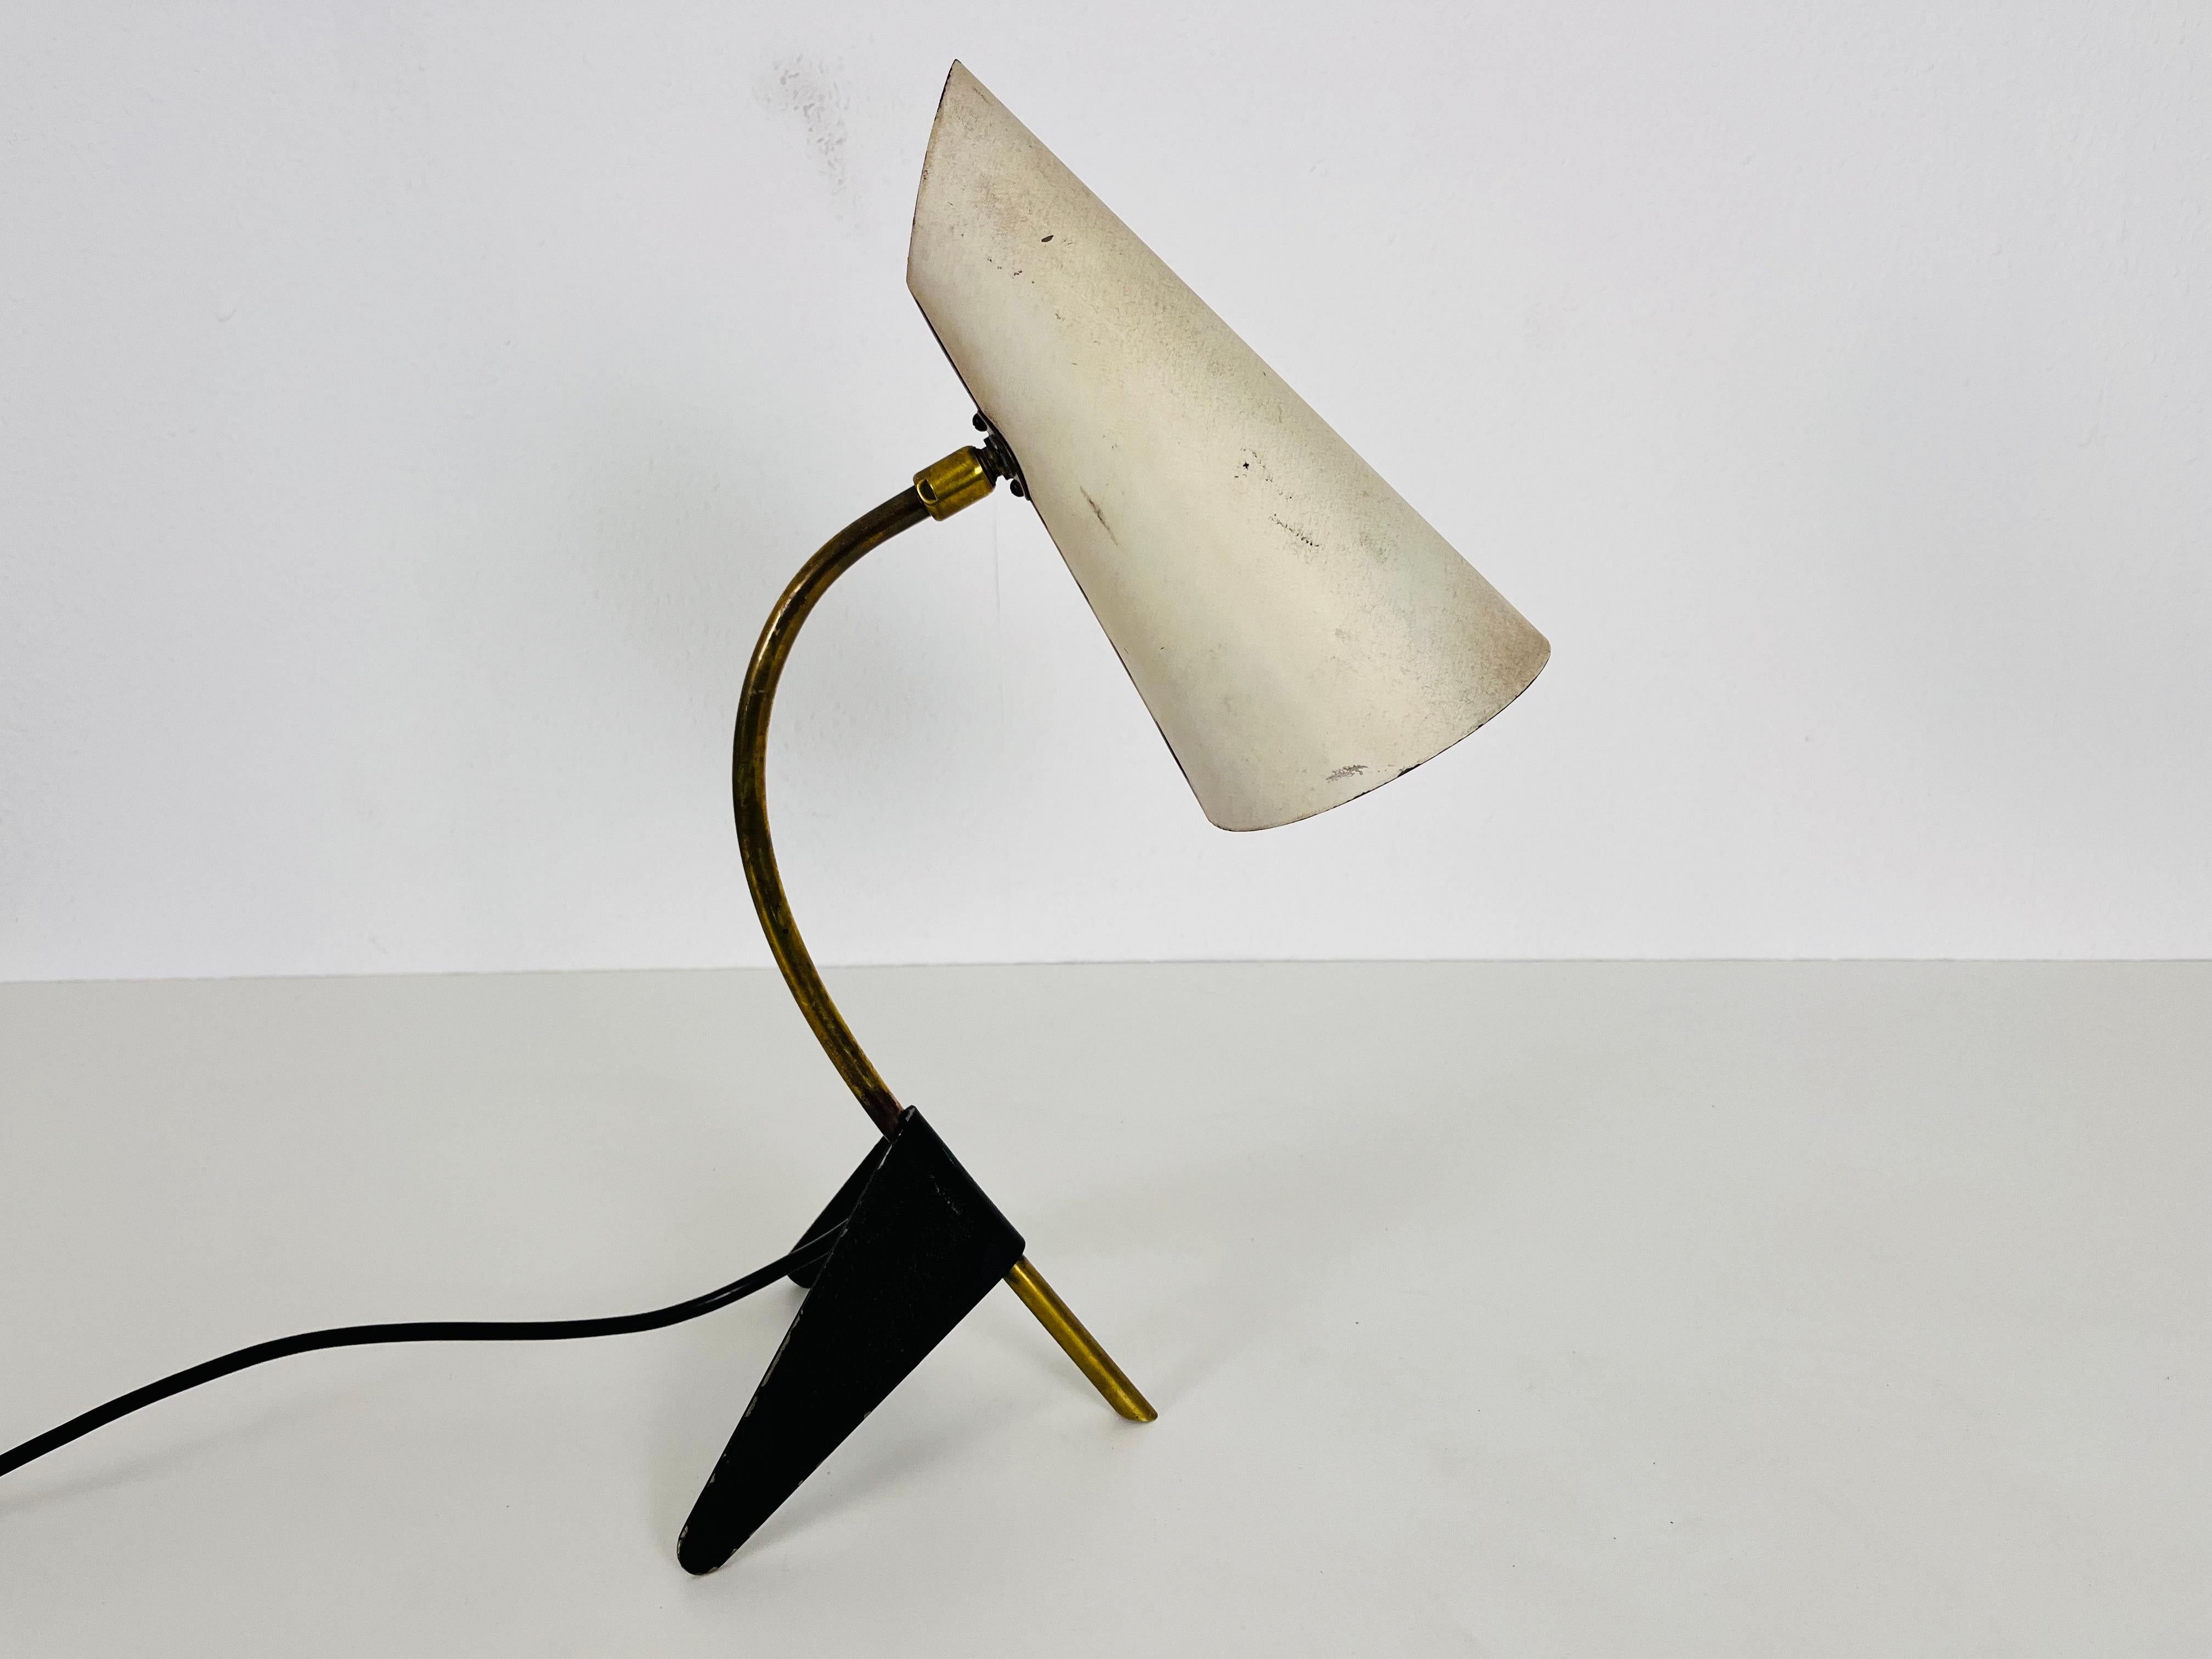 Exceptional mid-century table lamp designed by Louis Kalff for Cosack in the 1950s. Its foot is typical for the designer. The lamp is made of brass and metal.

The light requires one E14 light bulb. Works with both 120/220V. Good vintage